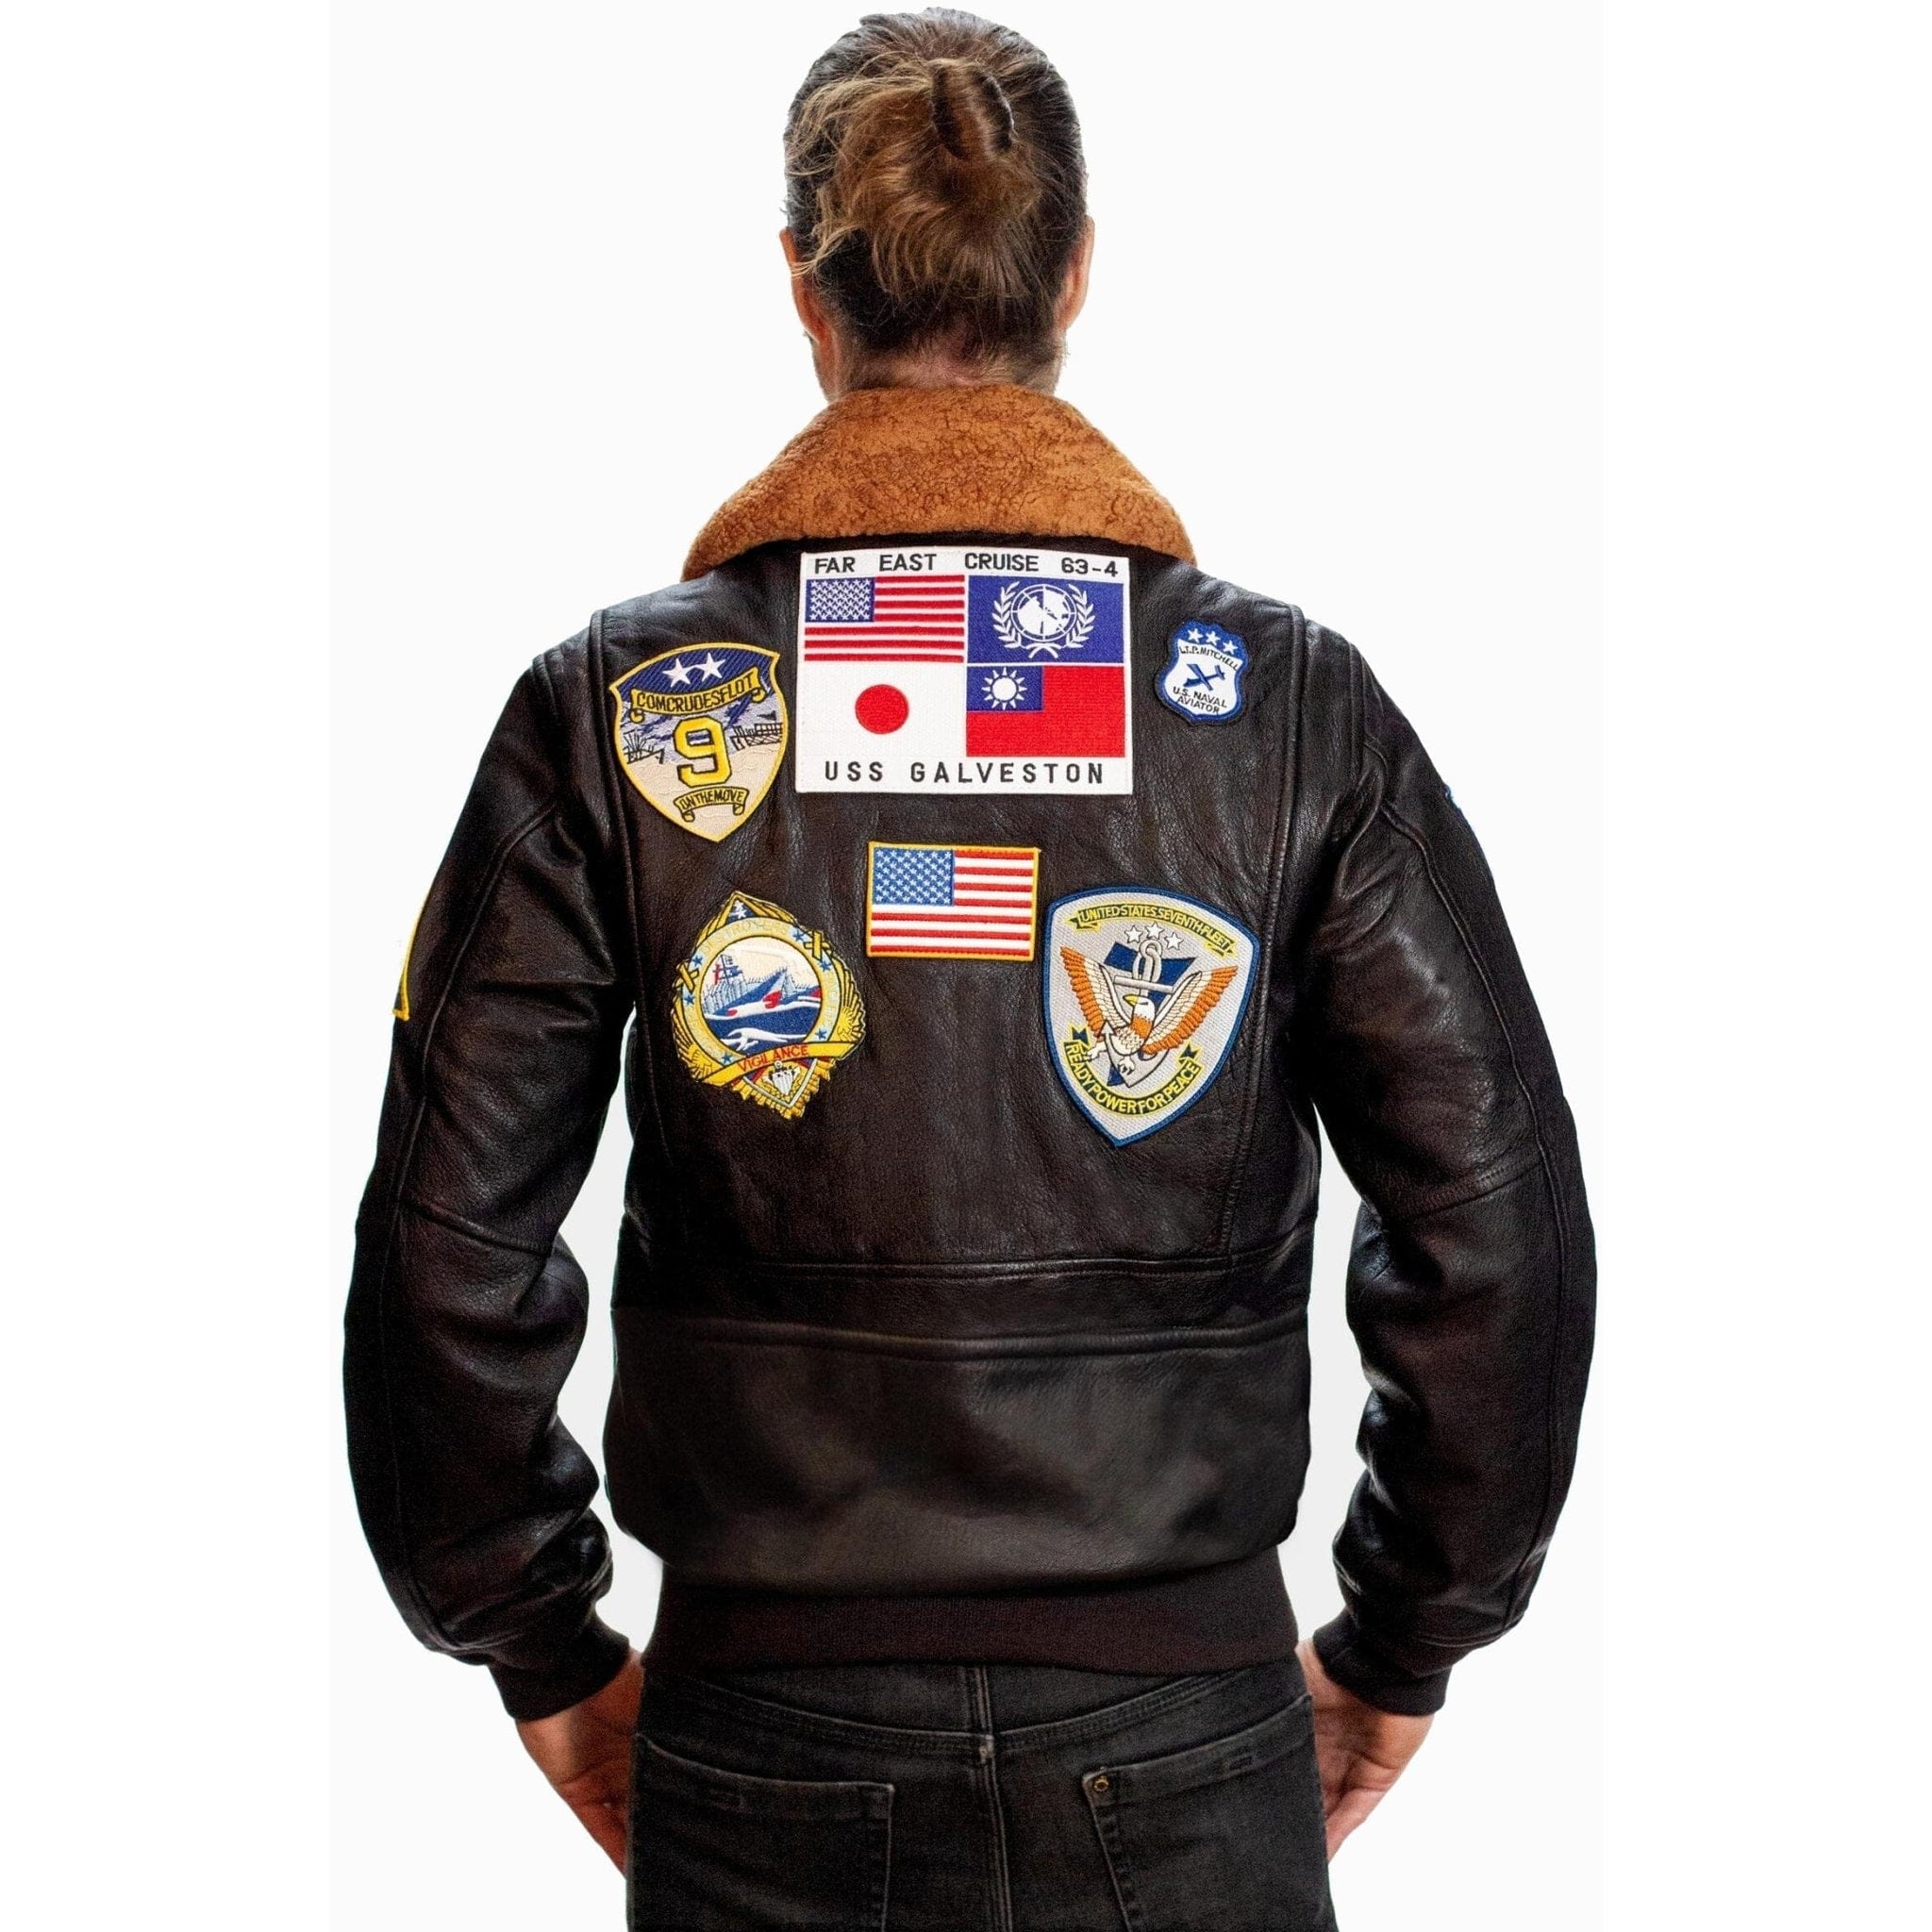 Top Gun® Official G-1 Leather Jacket with Patches